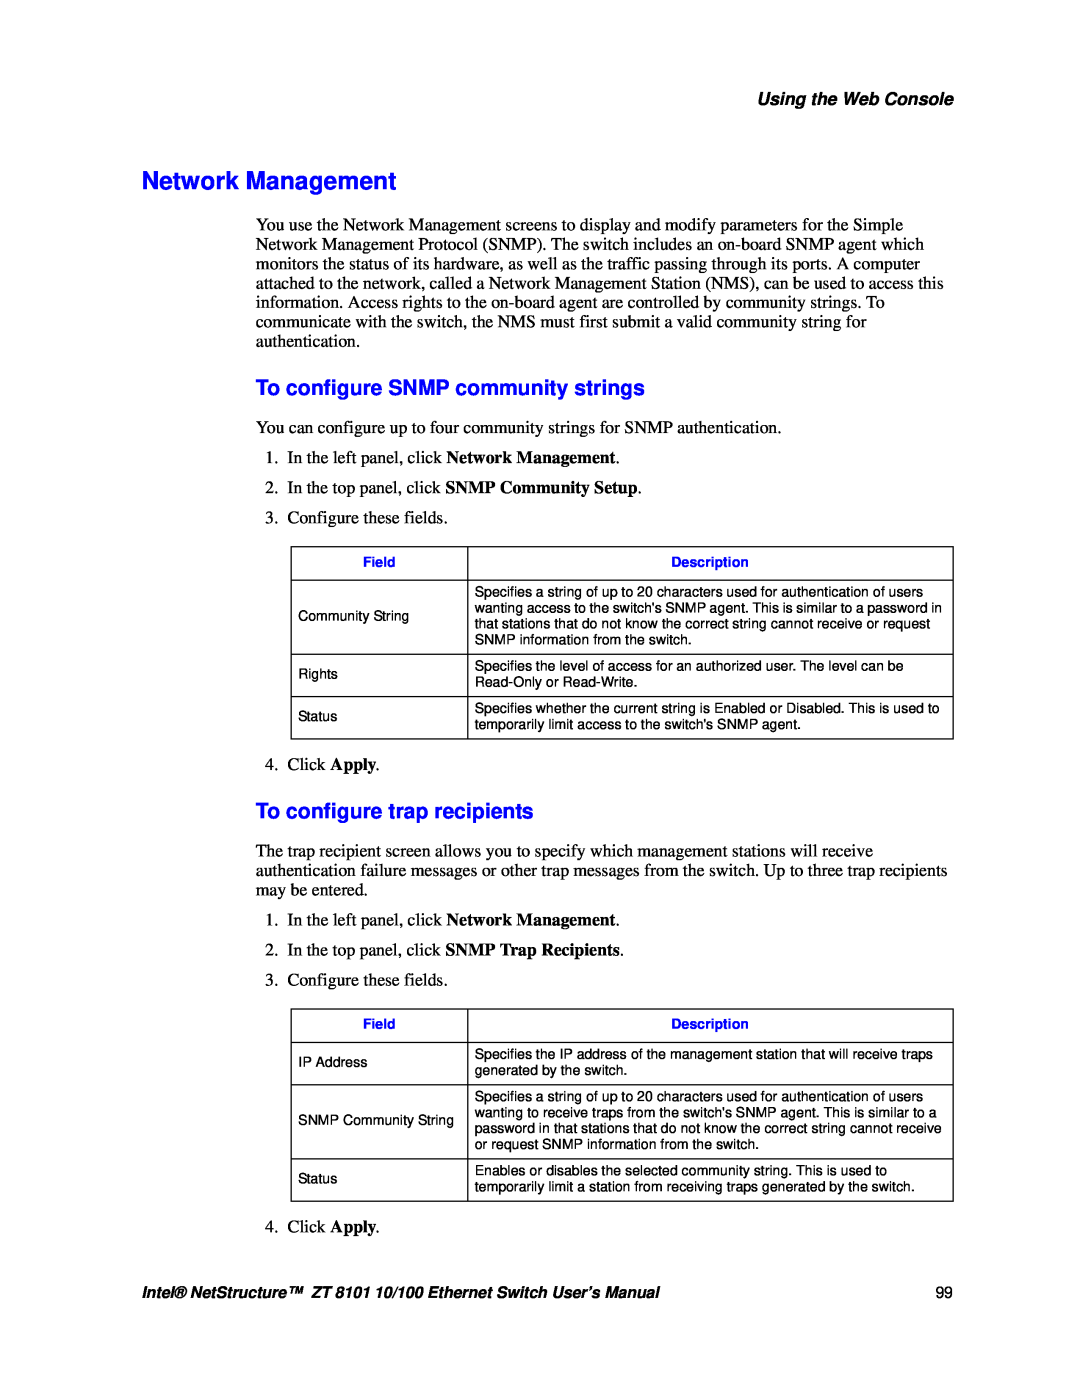 Intel ZT 8101 10/100 user manual Network Management, To configure SNMP community strings, To configure trap recipients 